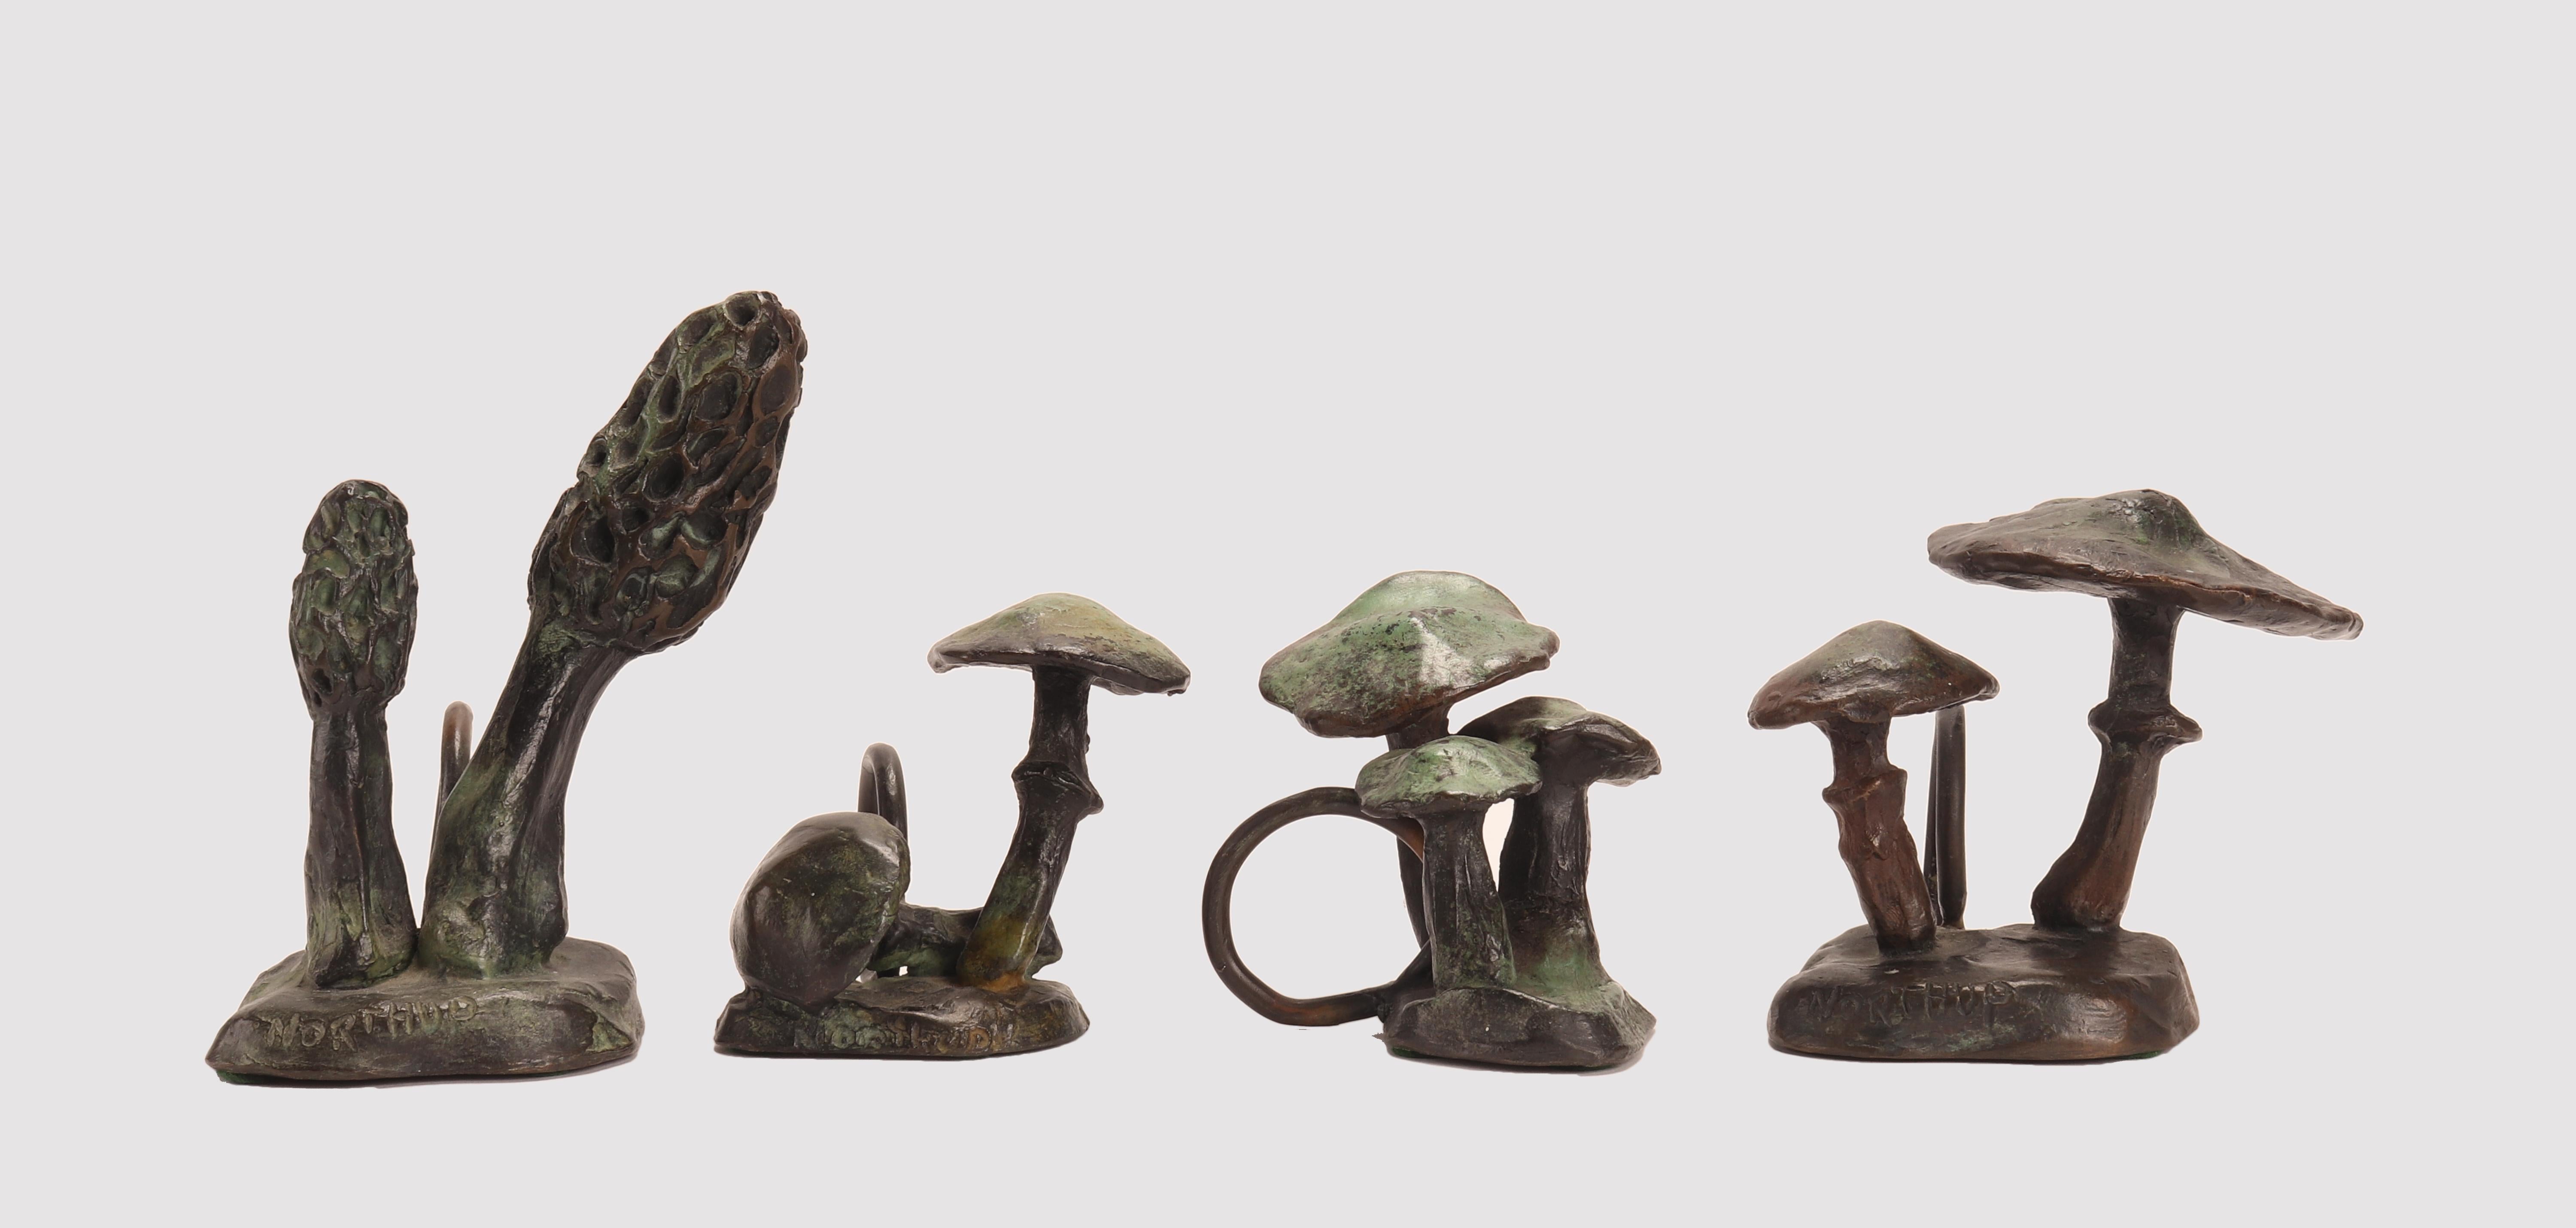 Group of 4 Napkin Holders Depicting Mushrooms, USA 1960 For Sale 4